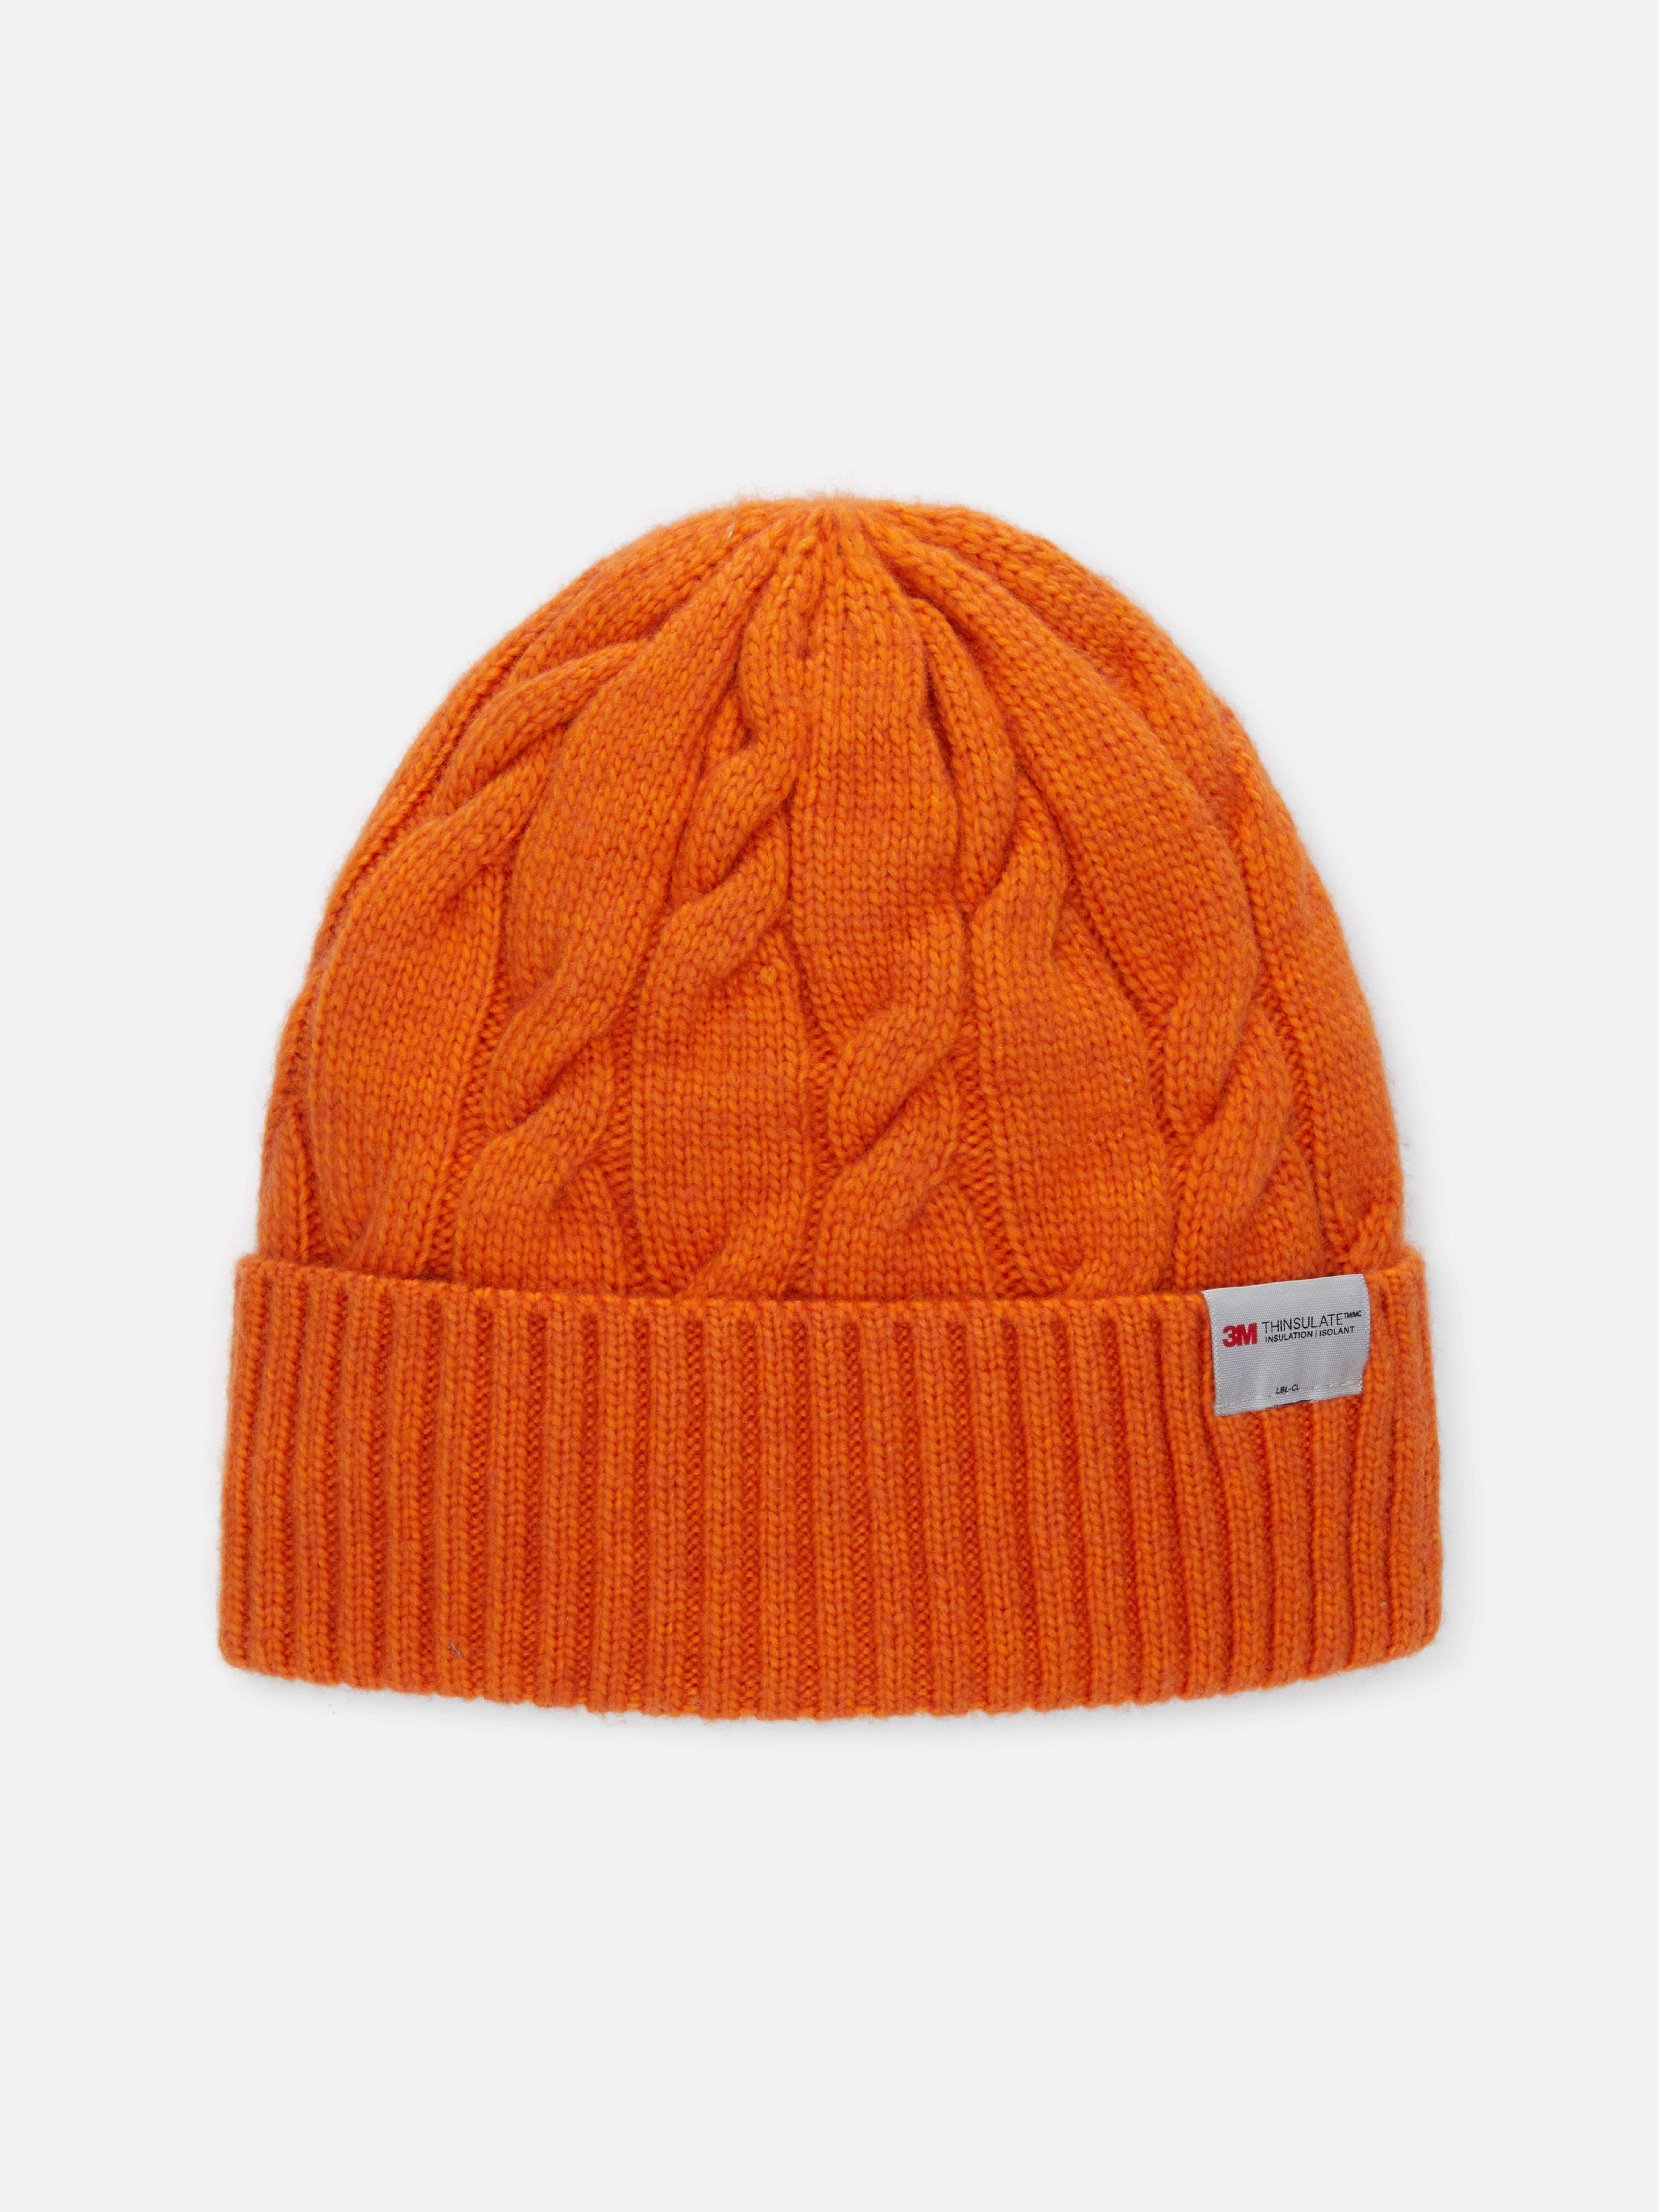 3M Cable Knit Beanie